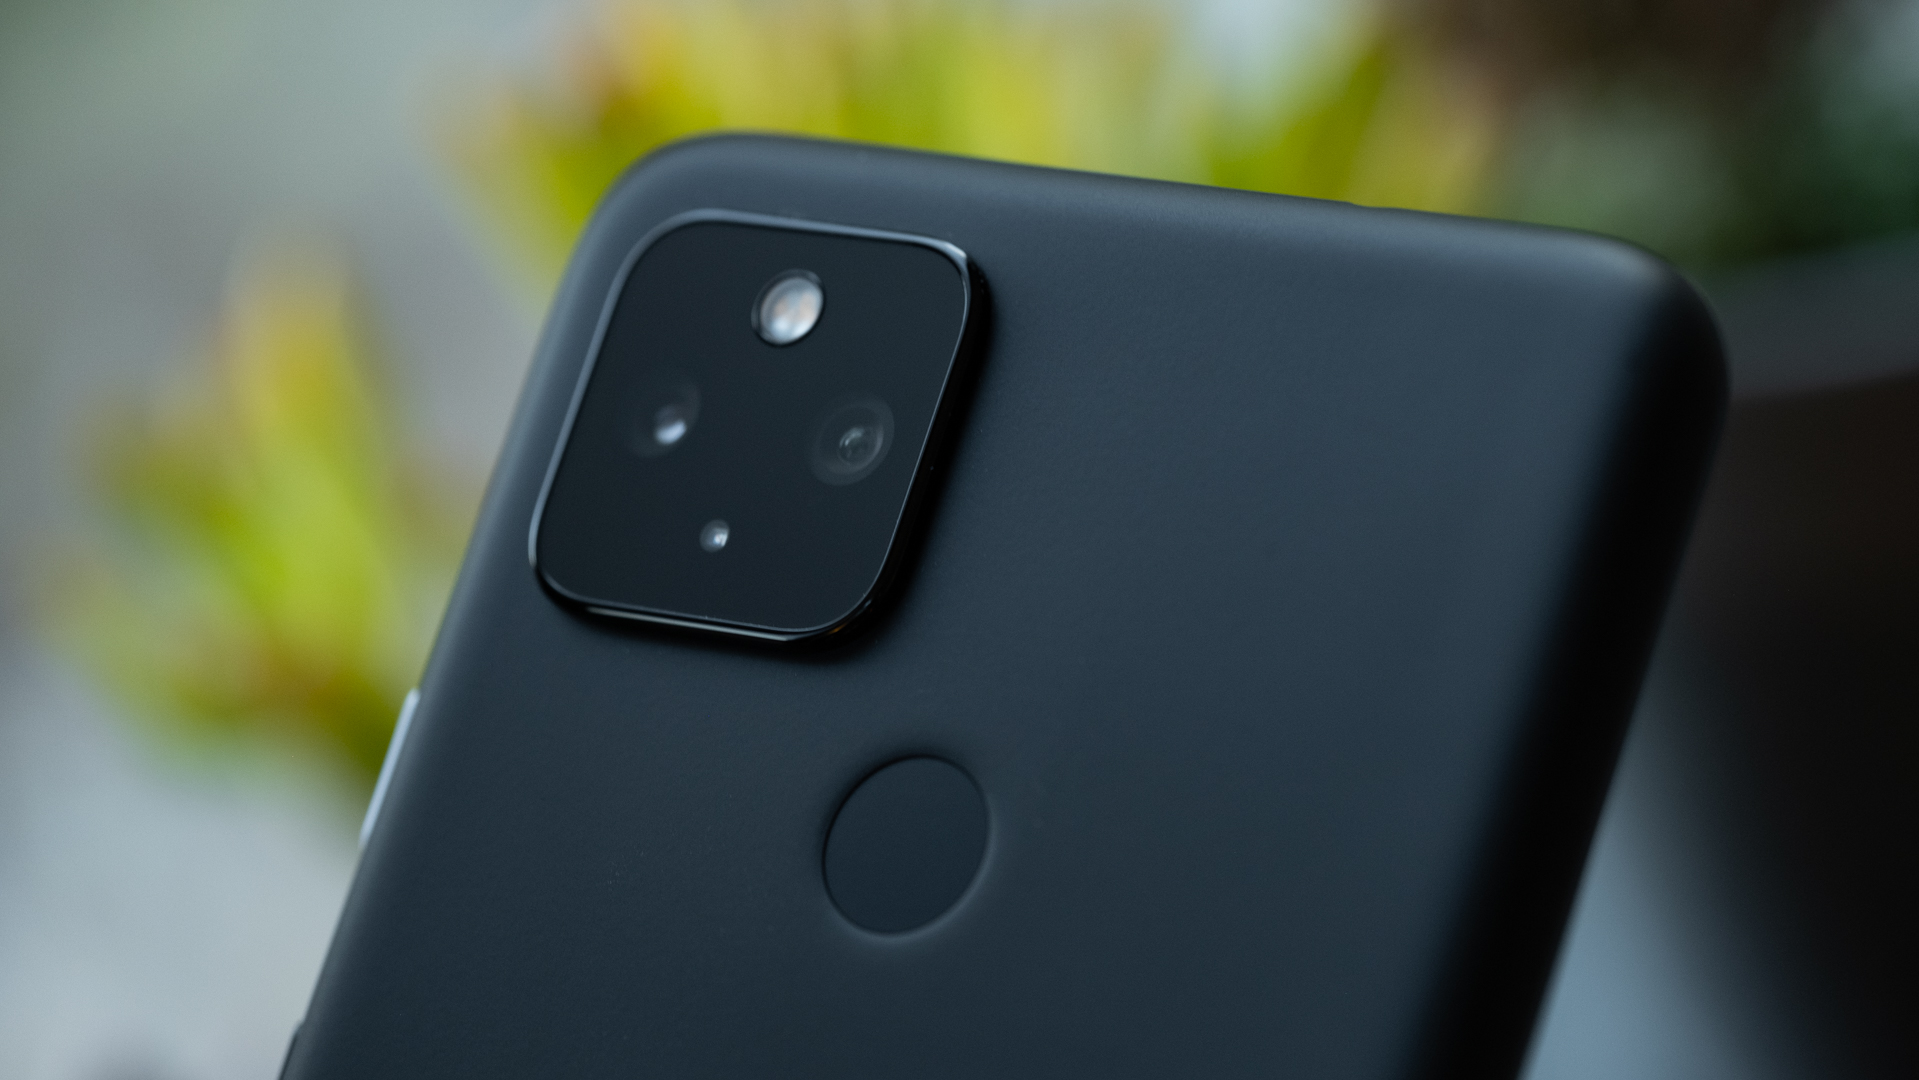 Google Pixel 4a 5G review: Perfectly balanced - Android Authority